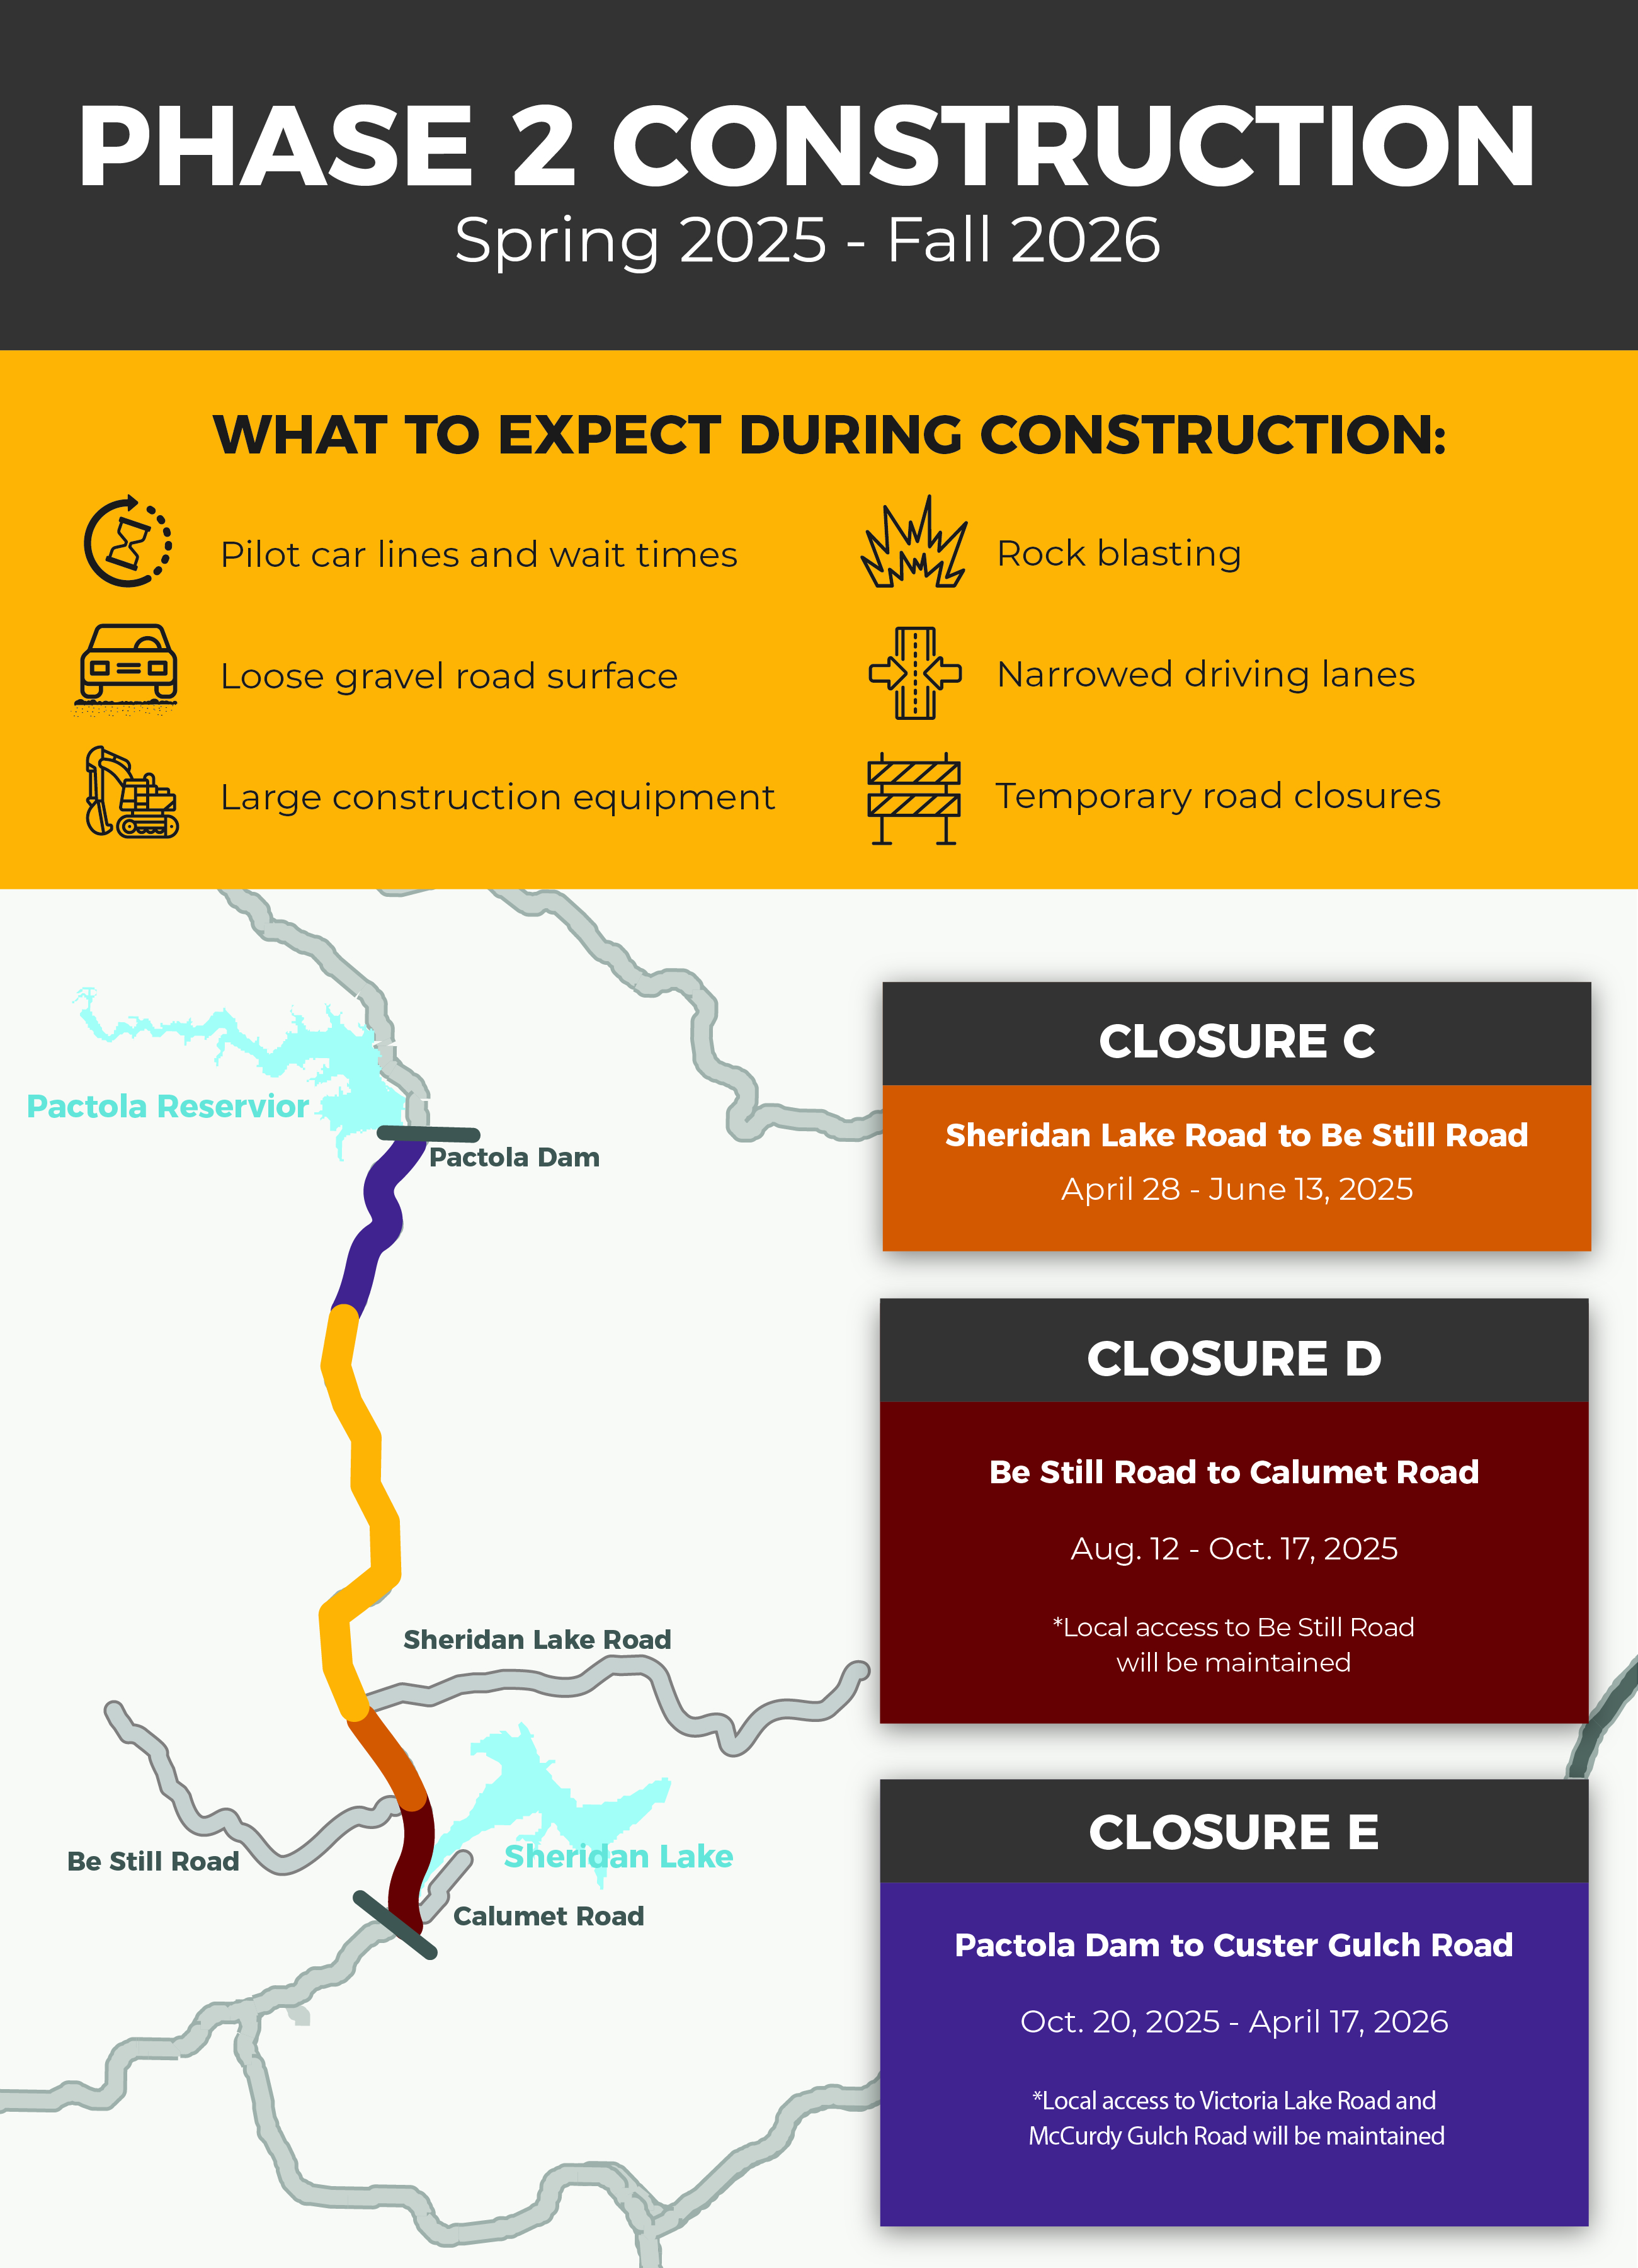 Phase 2 Construction Details